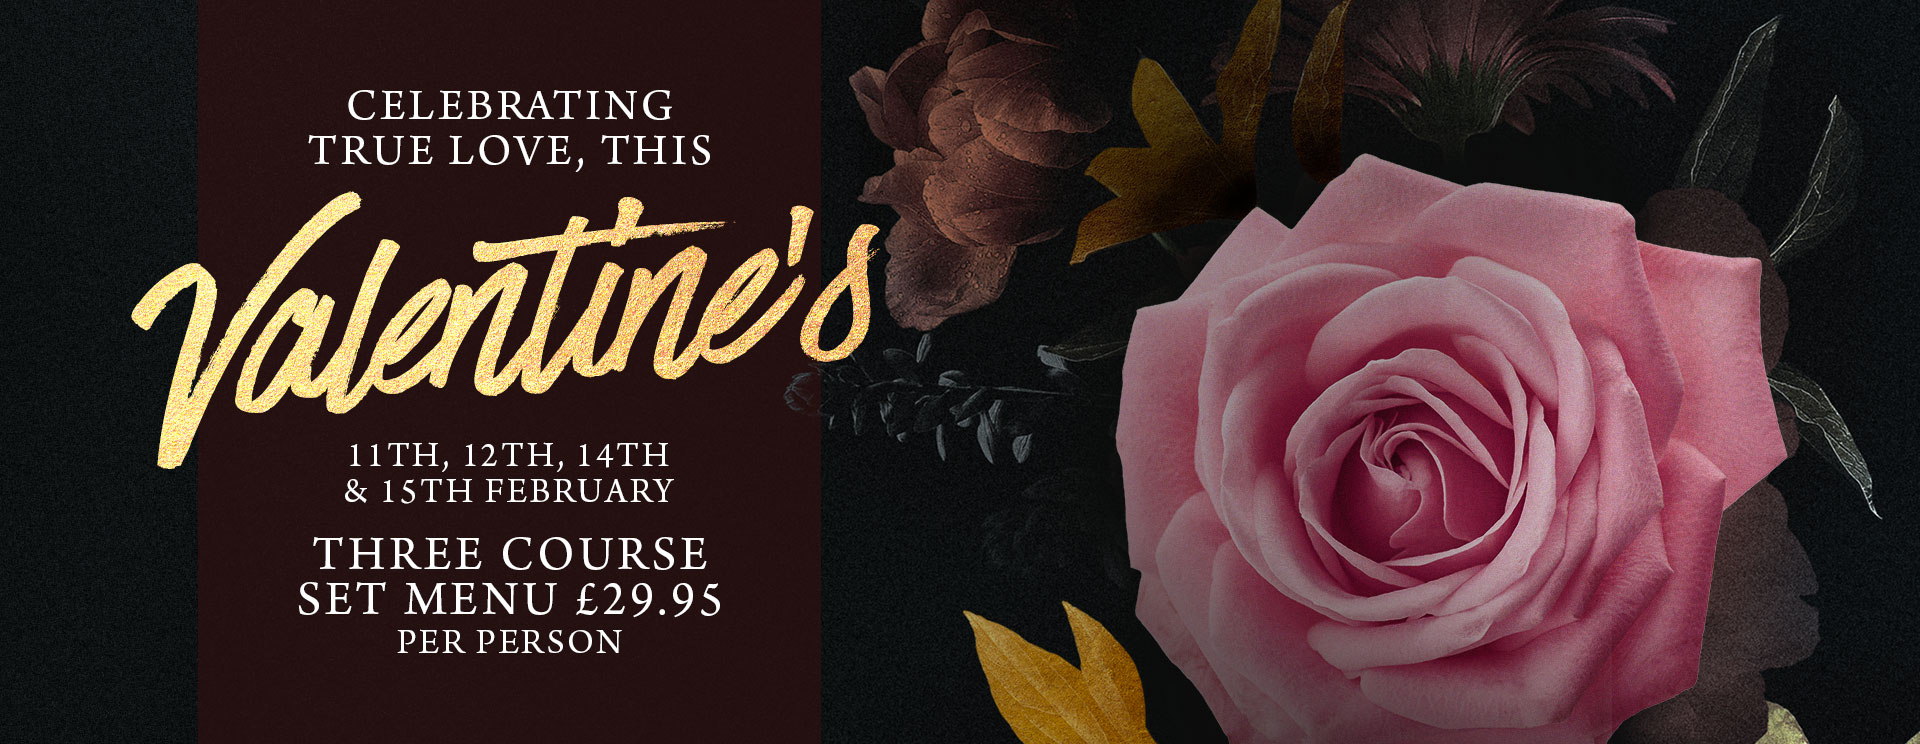 Valentines at The Lyttelton Arms